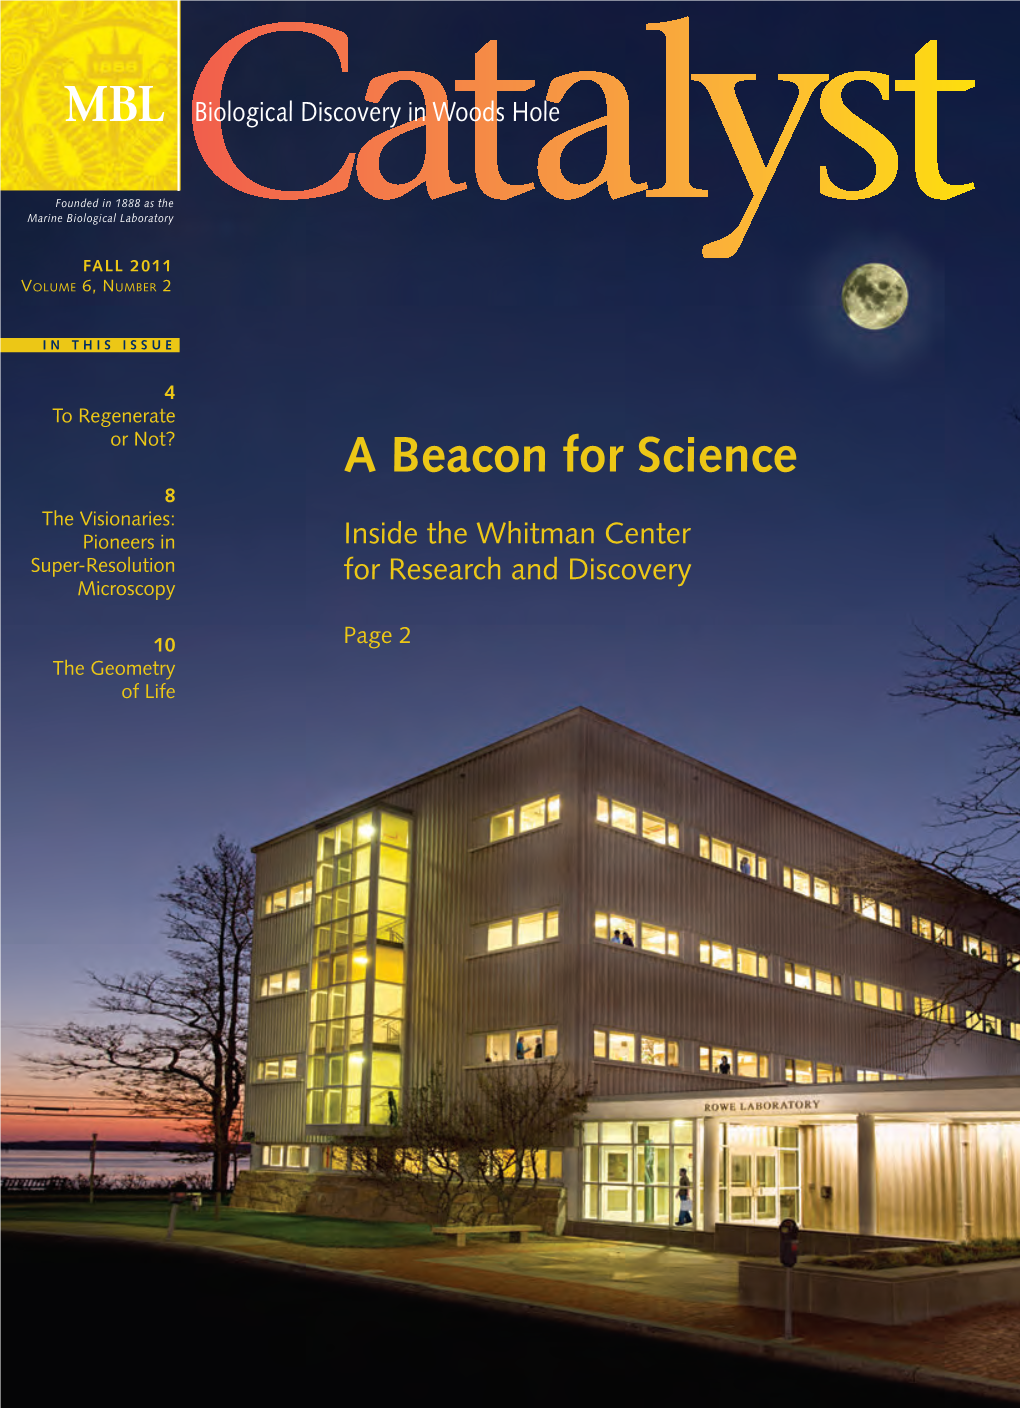 A Beacon for Science 8 the Visionaries: Pioneers in Inside the Whitman Center Super-Resolution for Research and Discovery Microscopy